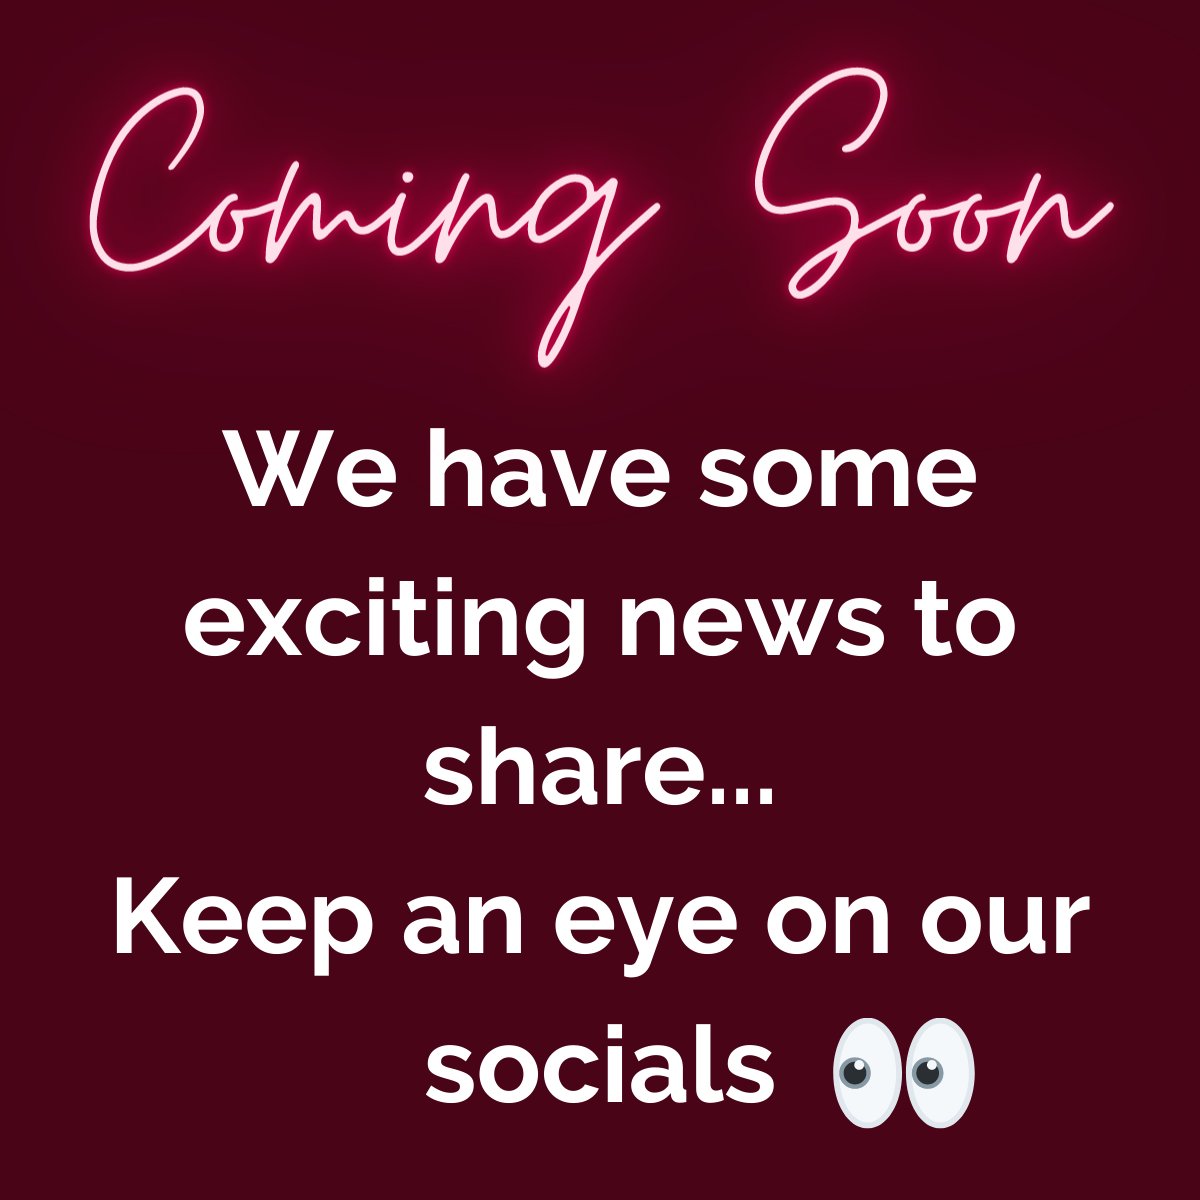 Our lips are sealed...for now 🤫

#comingsoon #bigreveal #companynews